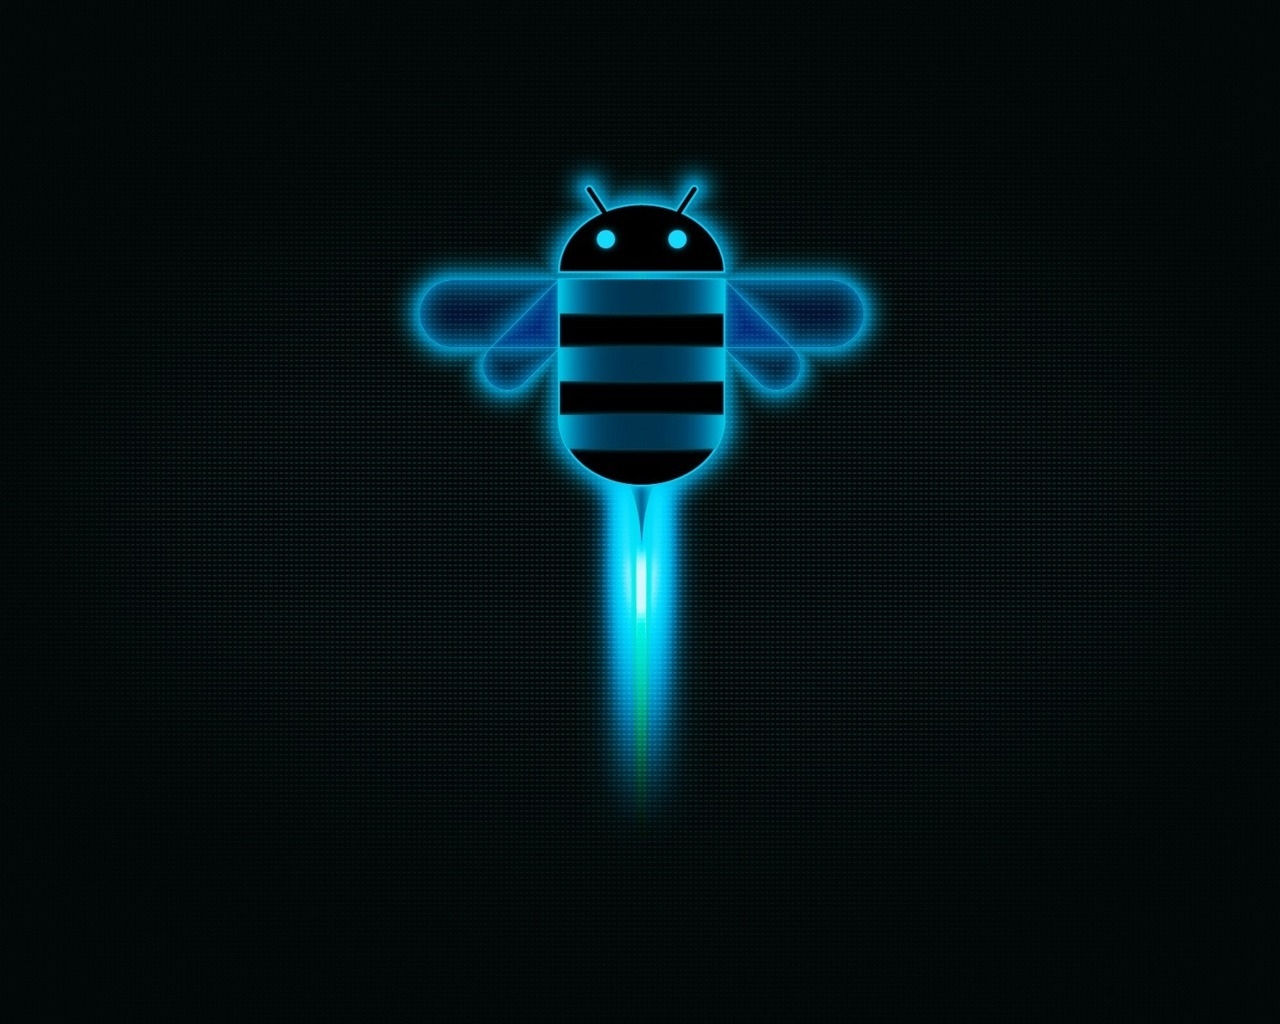 Honeycomb Android for 1280 x 1024 resolution